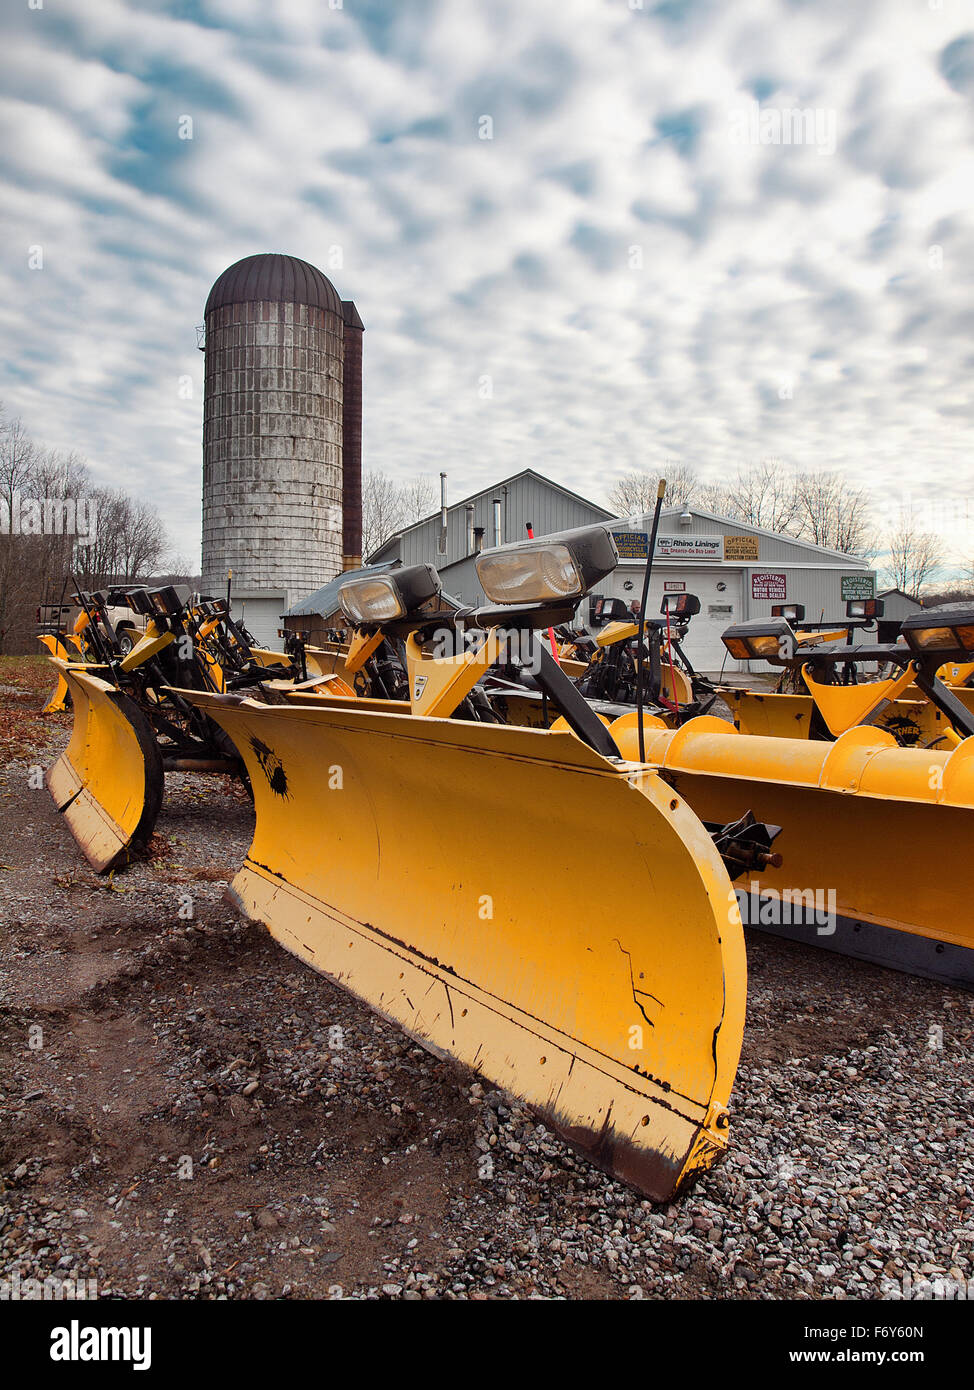 business selling and installing snow plows Stock Photo